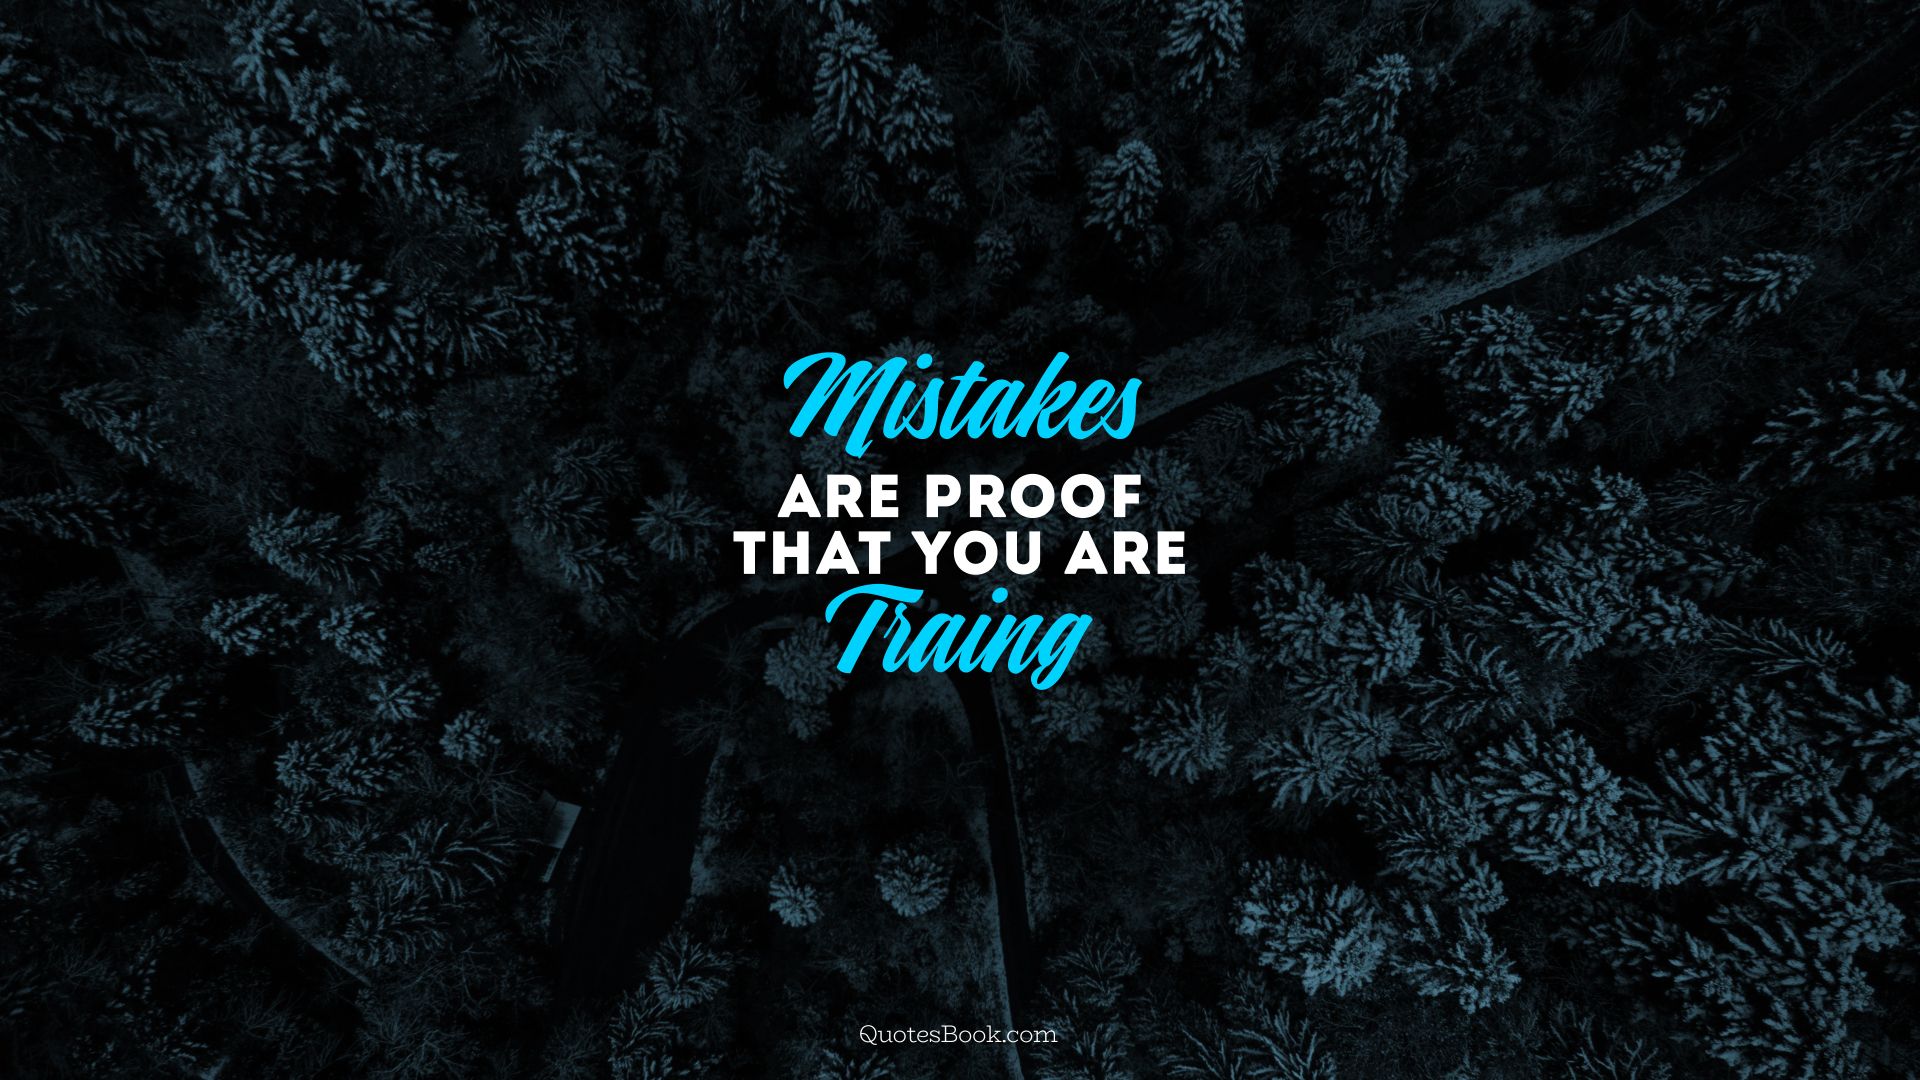 Mistakes are proof that you are traing
